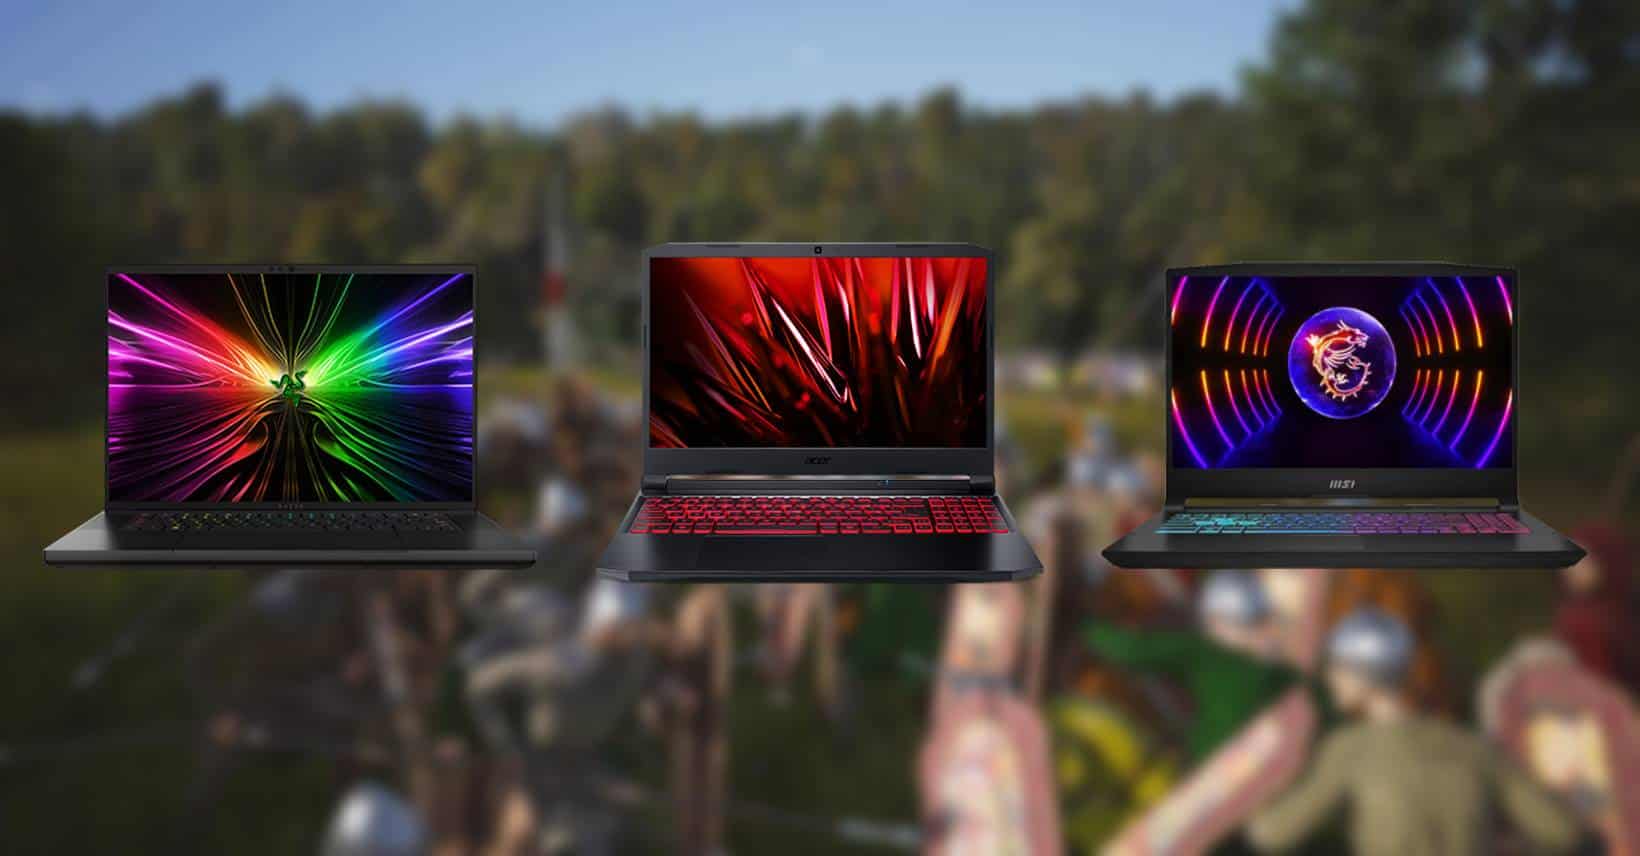 Three of the best gaming laptops for Manor Lords 2024, featuring vibrant screen displays, hover above a blurred outdoor festival scene.